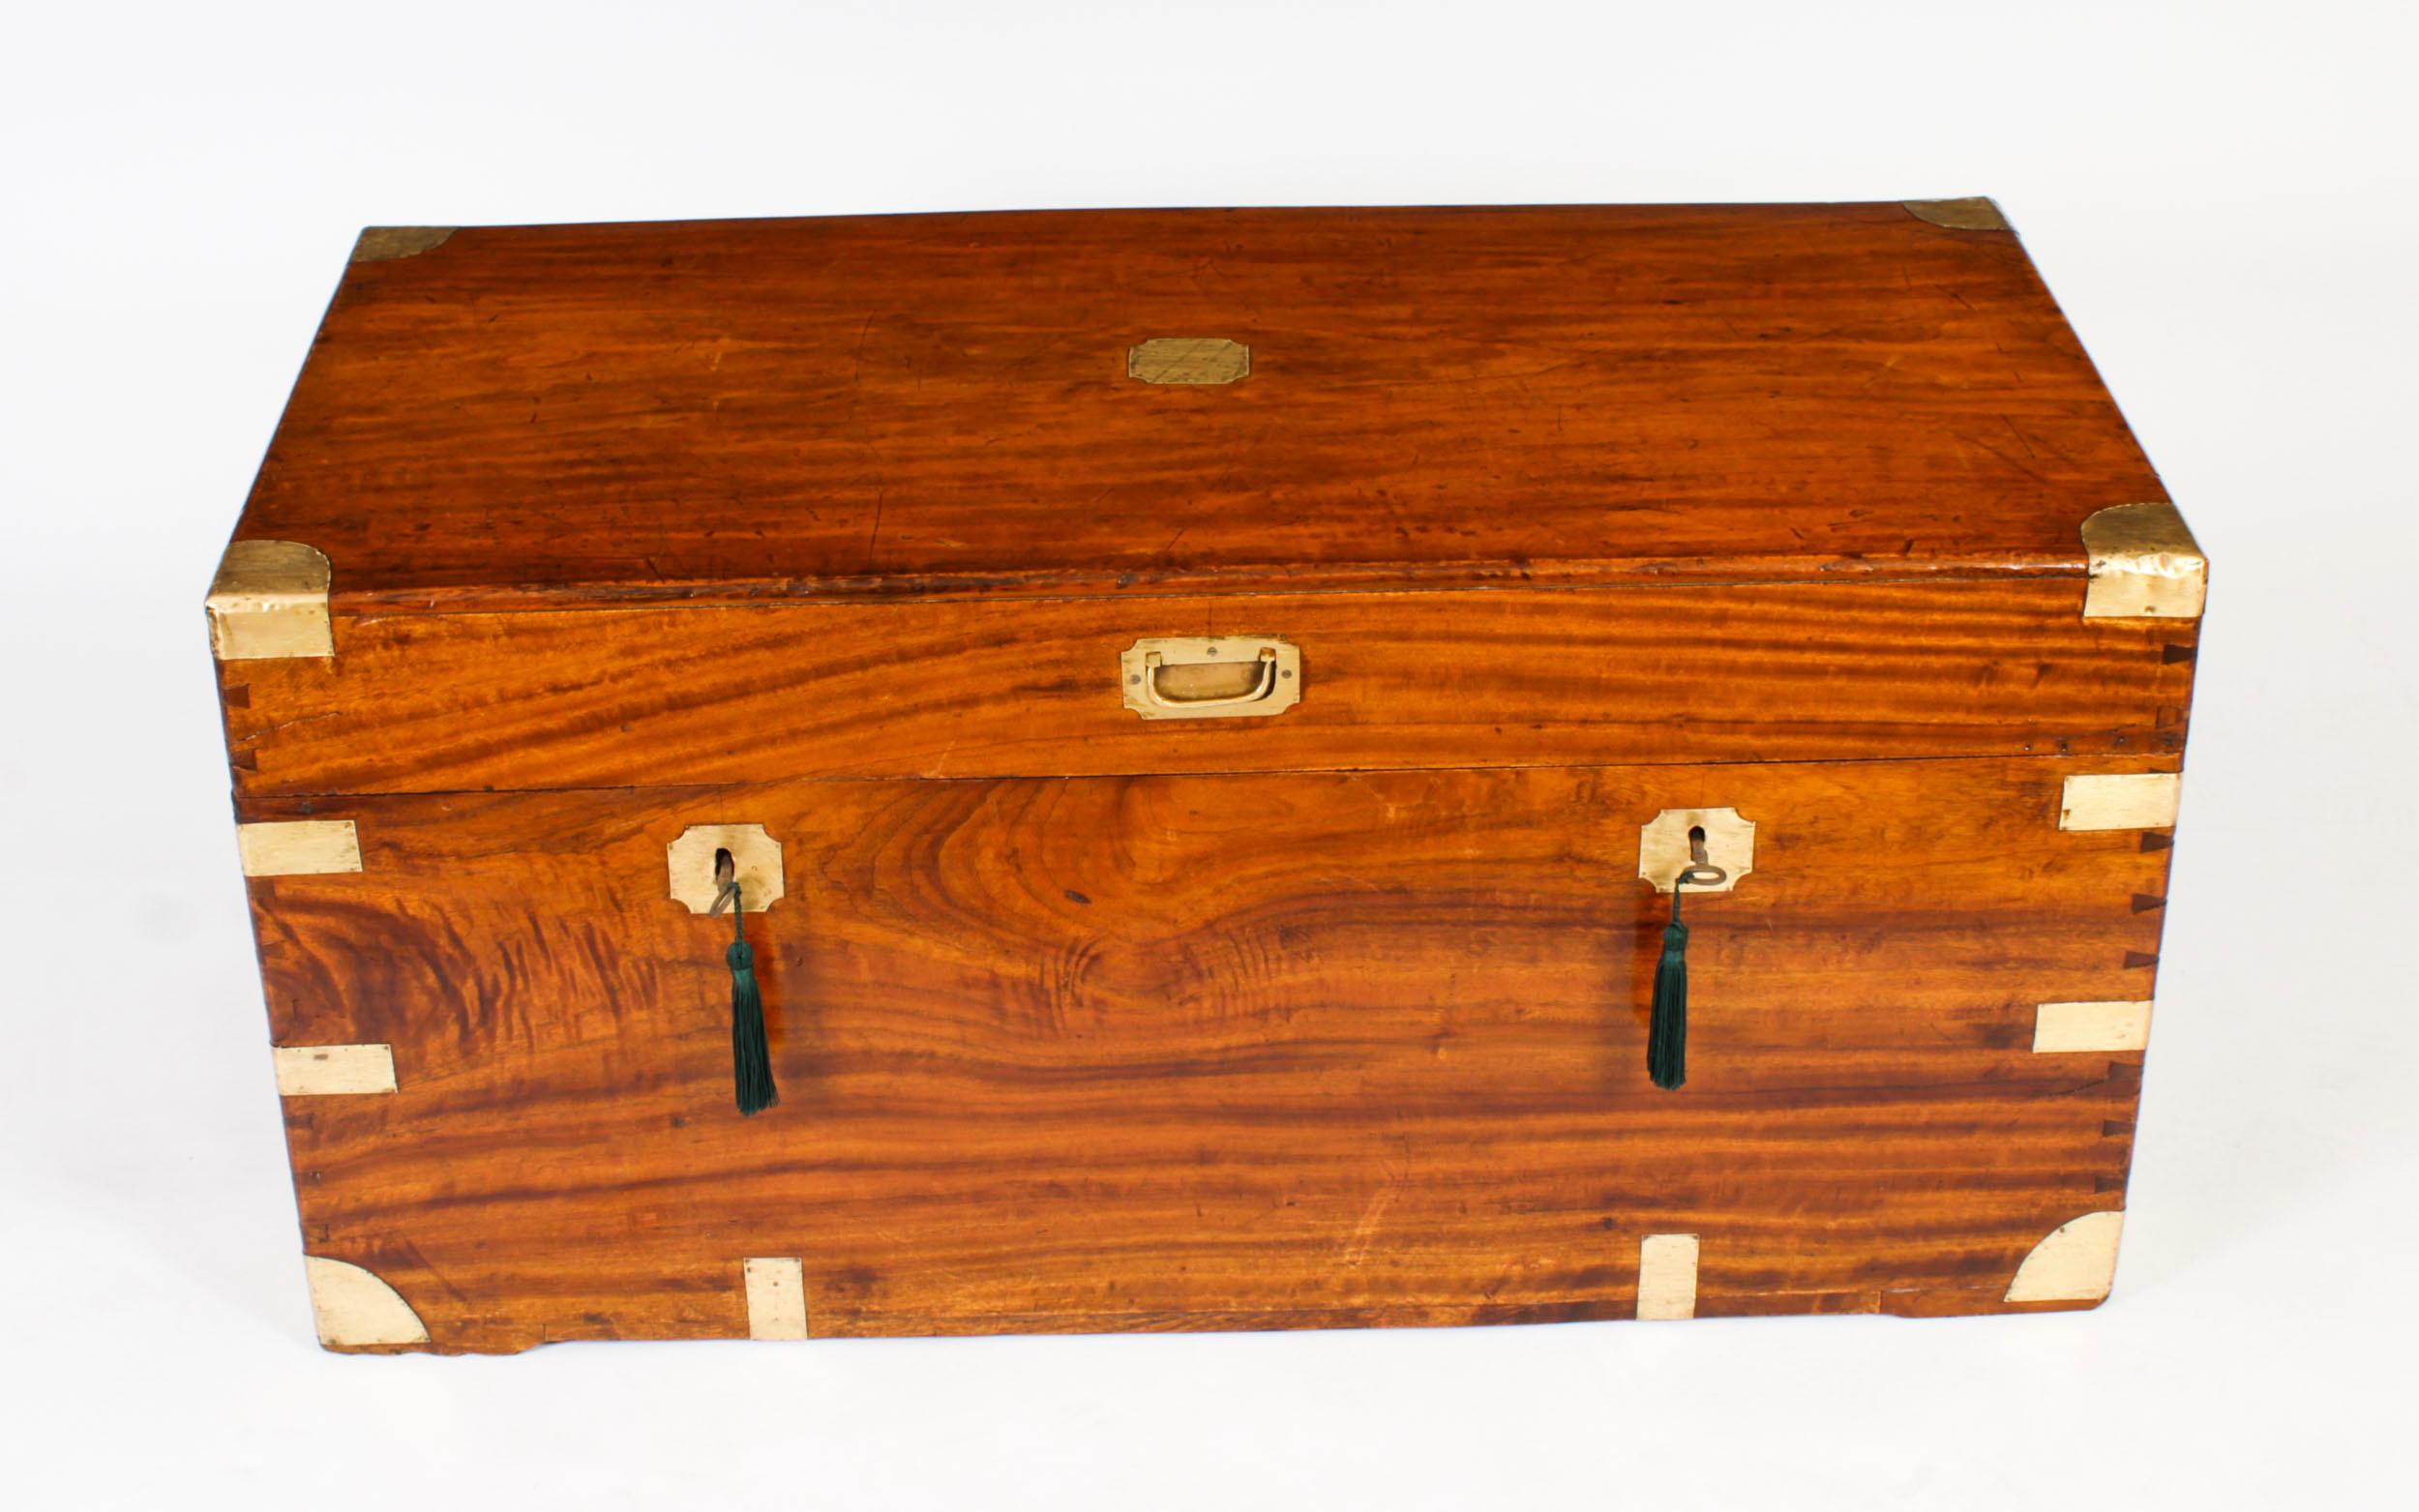 This is beautifully crafted antique Georgian camphorwood military campaign trunk or coffer, ideal for use as a coffee table, circa 1820 in date.

This antique trunk is made from the finest quality camphorwood which has a beautiful grain and scent.